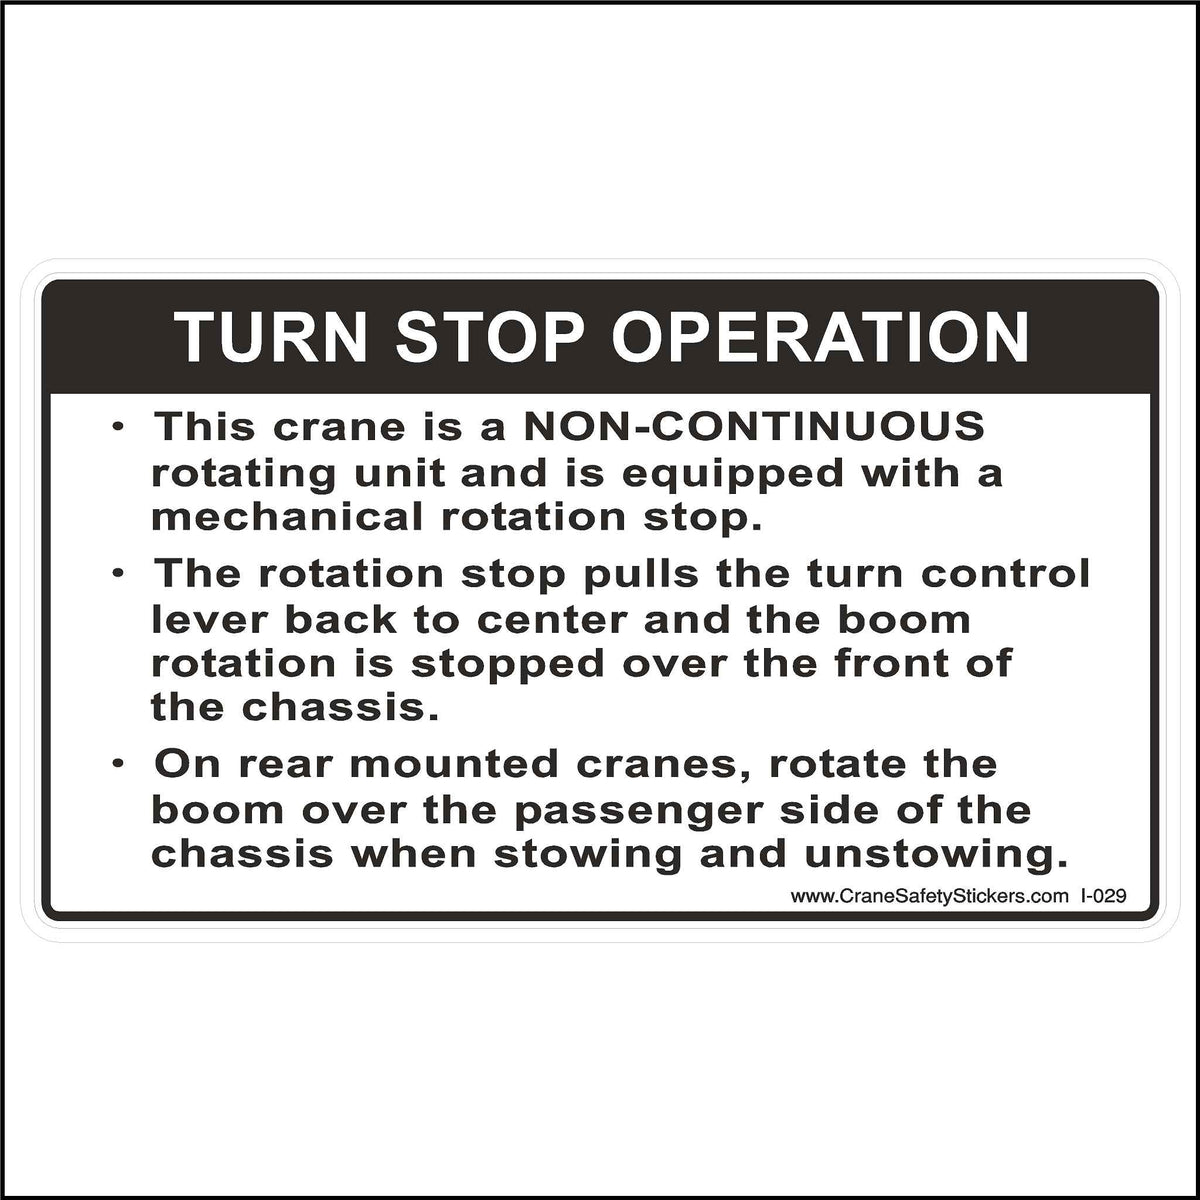 Crane Turn Stop Operation Label Printed with. Turn Stop Operation.  This crane is a NON-CONTINUOUS rotating unit and is equipped with a mechanical rotation stop.  The rotation stop pulls the turn control lever back to center and the boom rotation is stopped over the front of the chassis.  On rear-mounted cranes, rotate the boom over the passenger side of the chassis when stowing and unstowing.